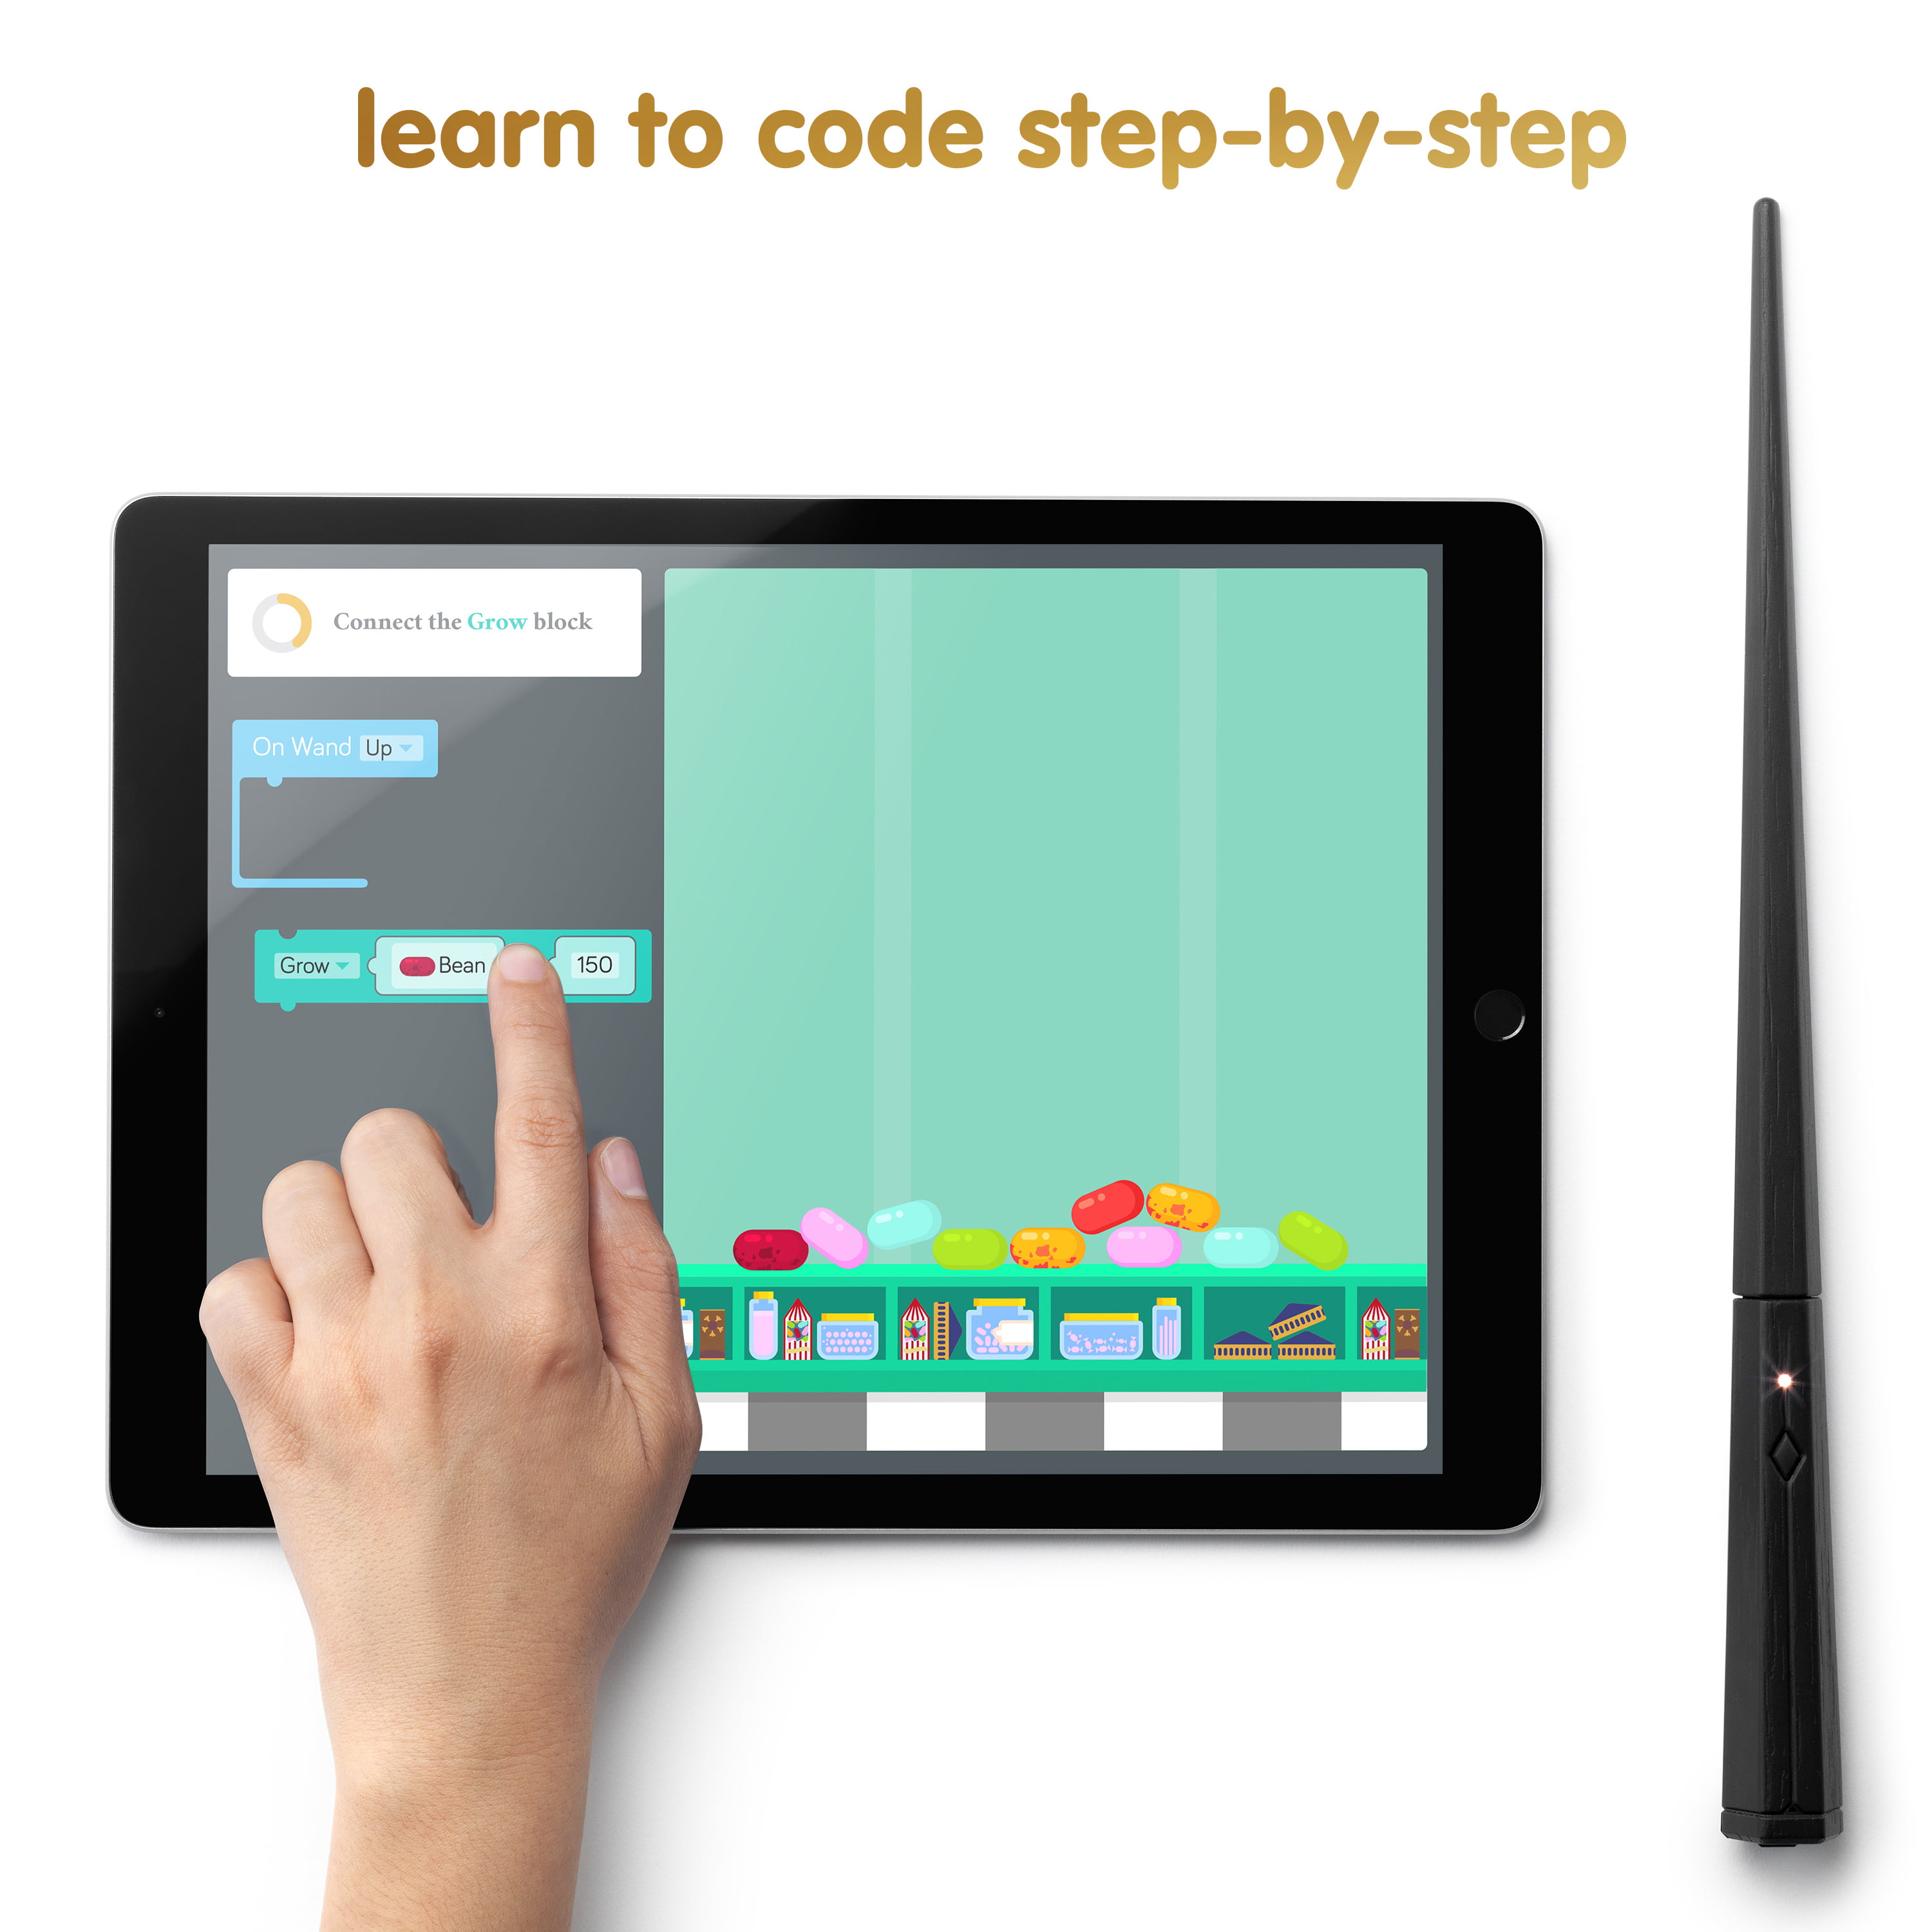 Kano Harry Potter Coding Kit Make Magic. Build a Wand Learn To Code 